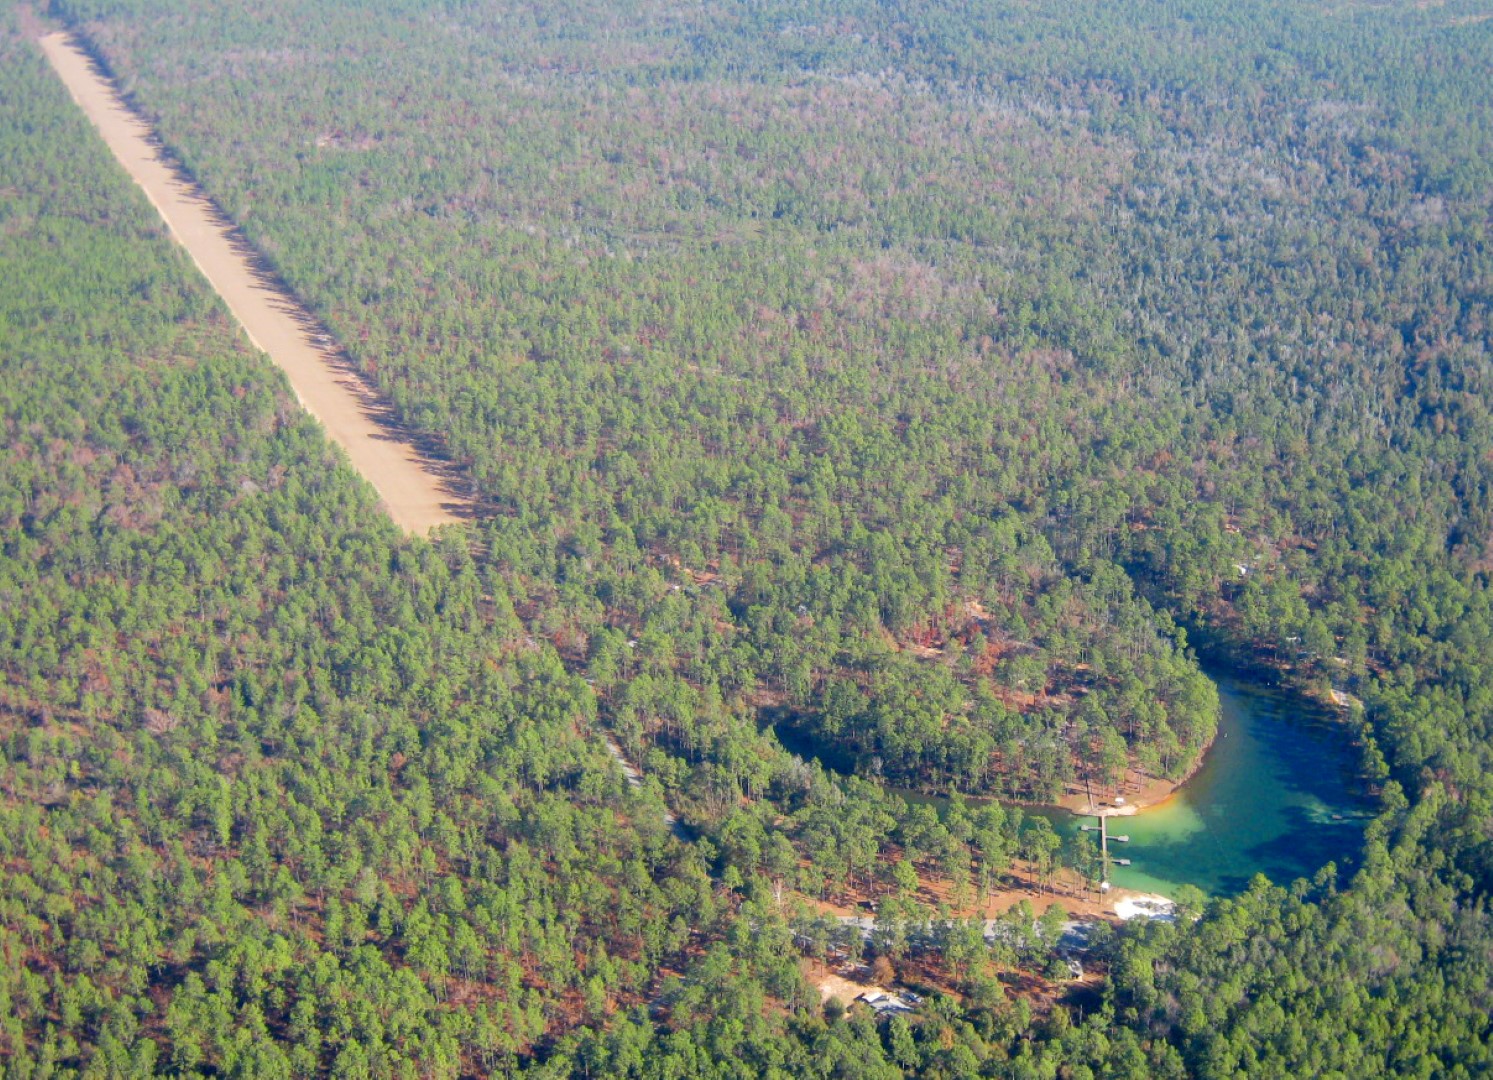 This aerial photo, taken looking north, demonstrates how close the airstrip is to the Krul Recreation Area “swimming hole,” restrooms, and campground. Runway 18/36 is at 200 feet elevation and has 2,500 x 50 feet usable, with generous overruns at both ends. Photo by Bobby Capozzi.